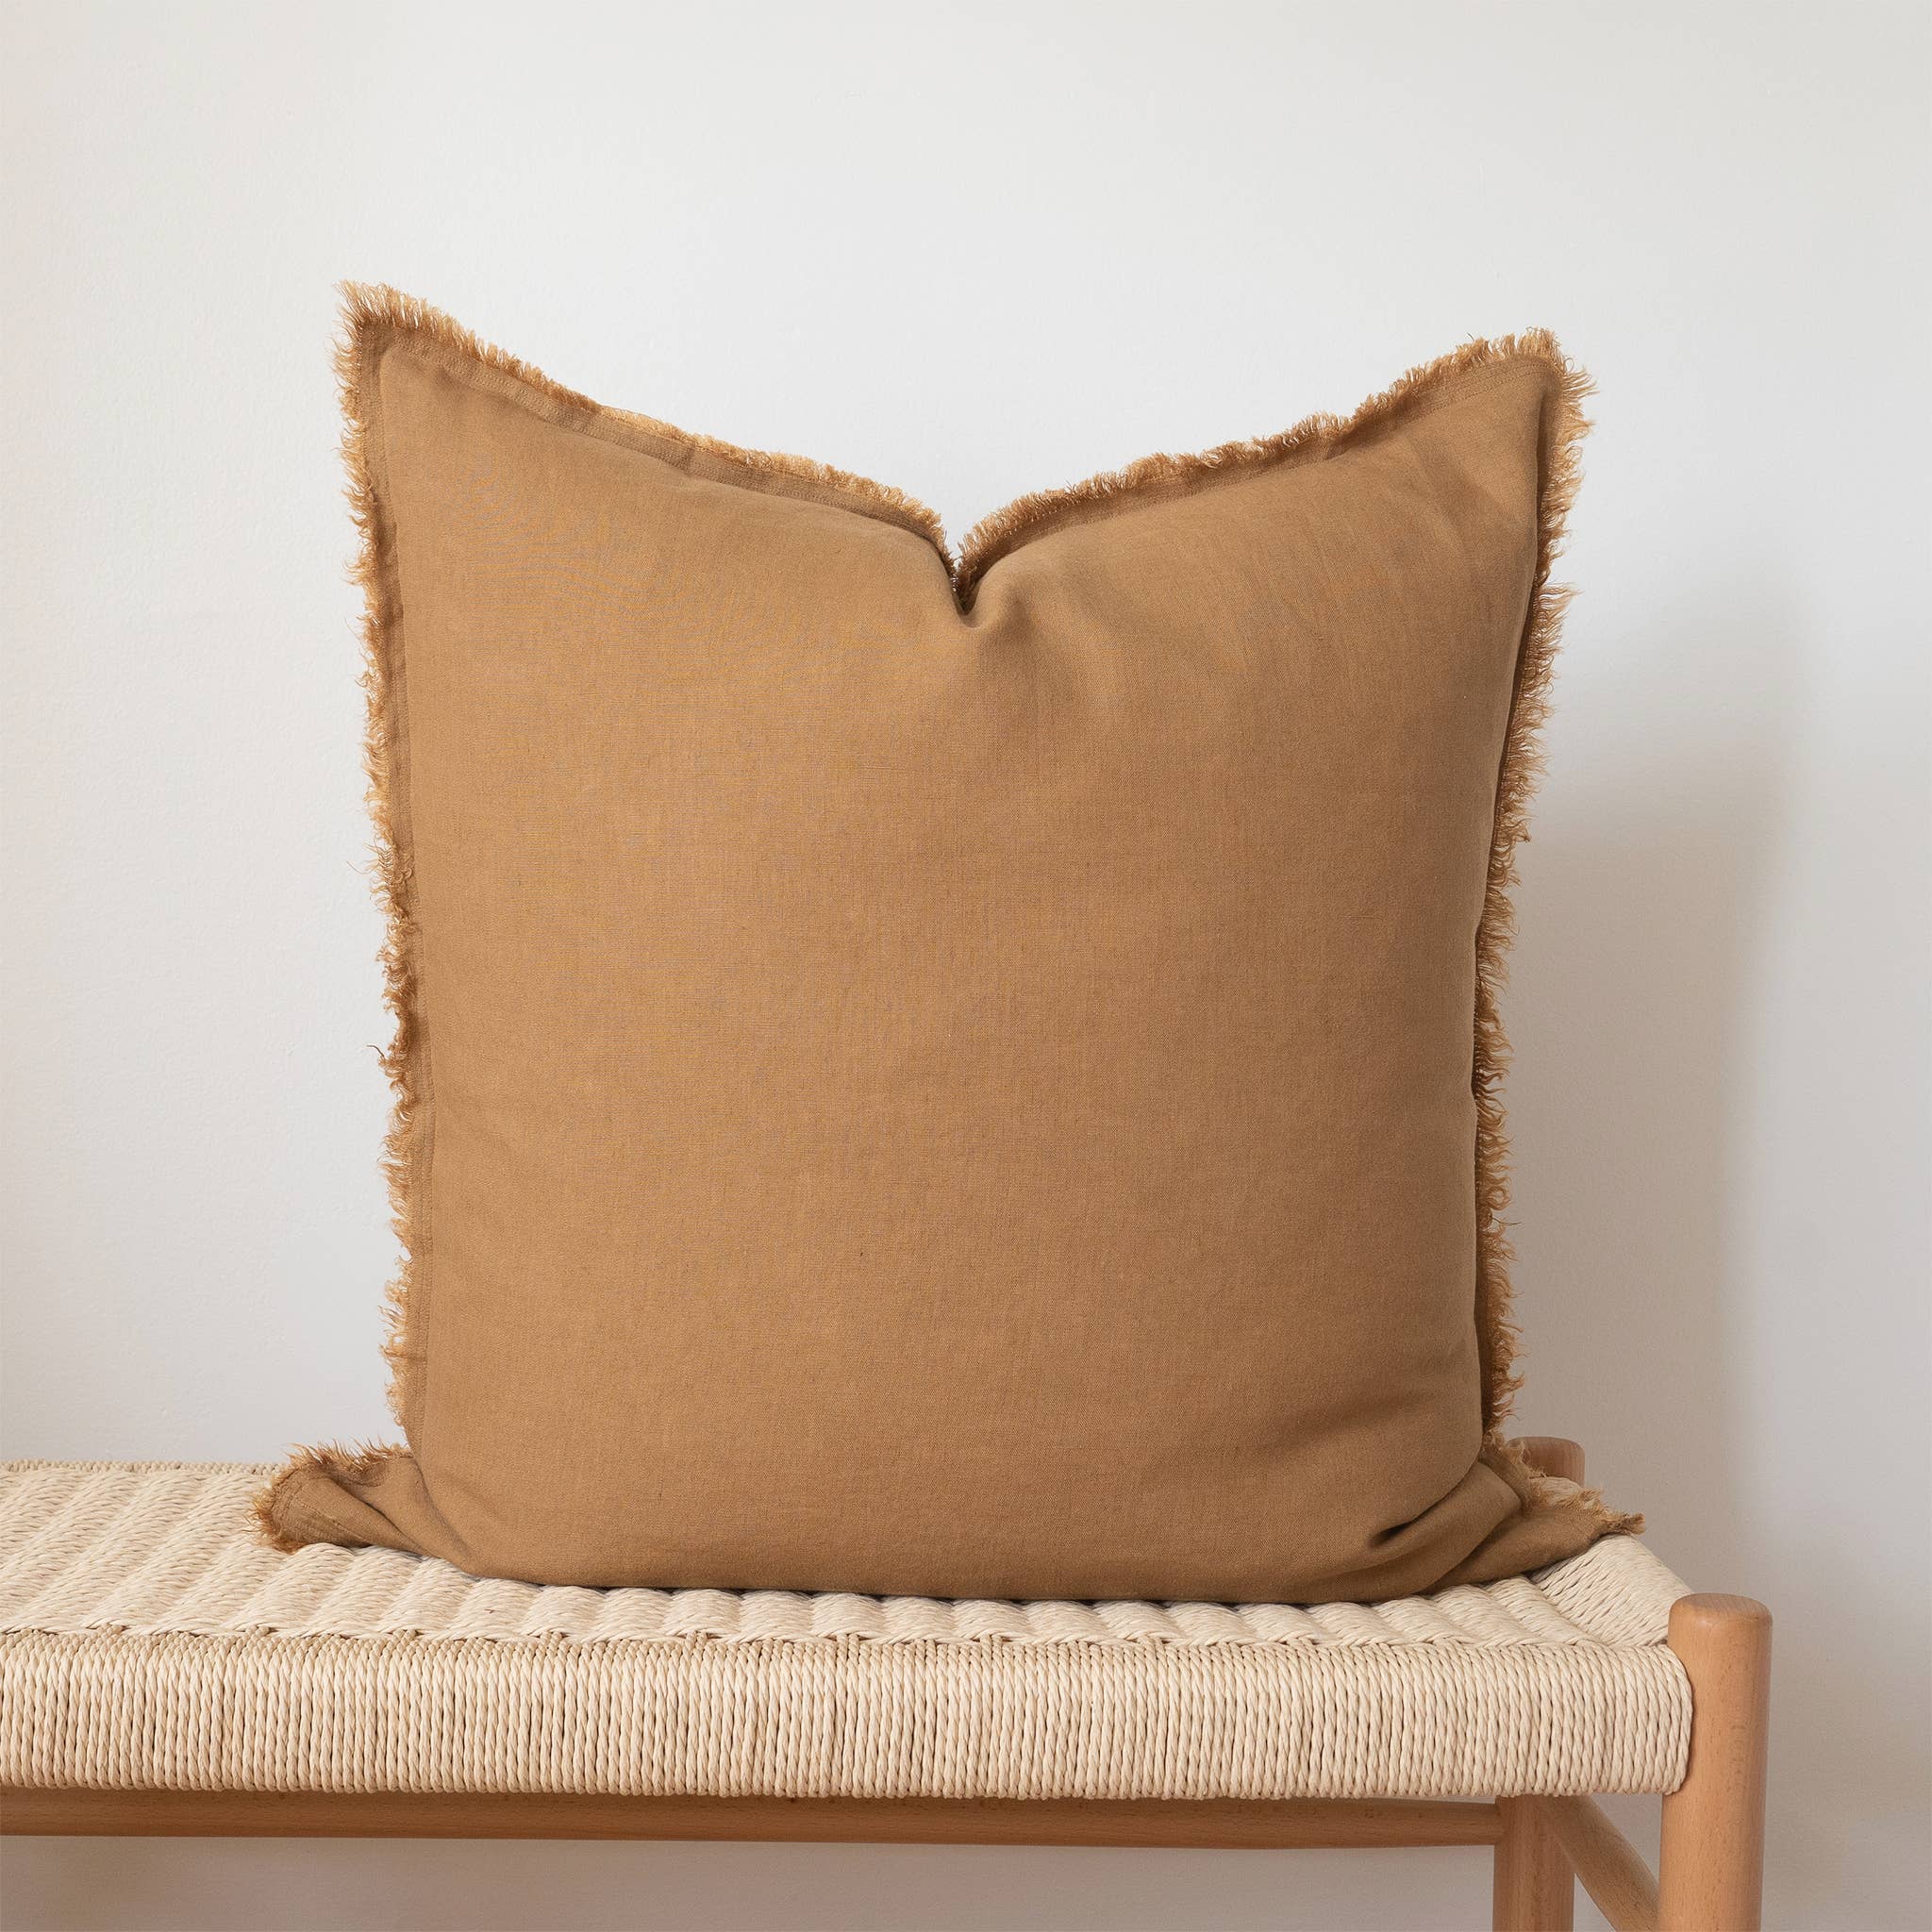 Square Fringed Linen Pillow Cover - Camel